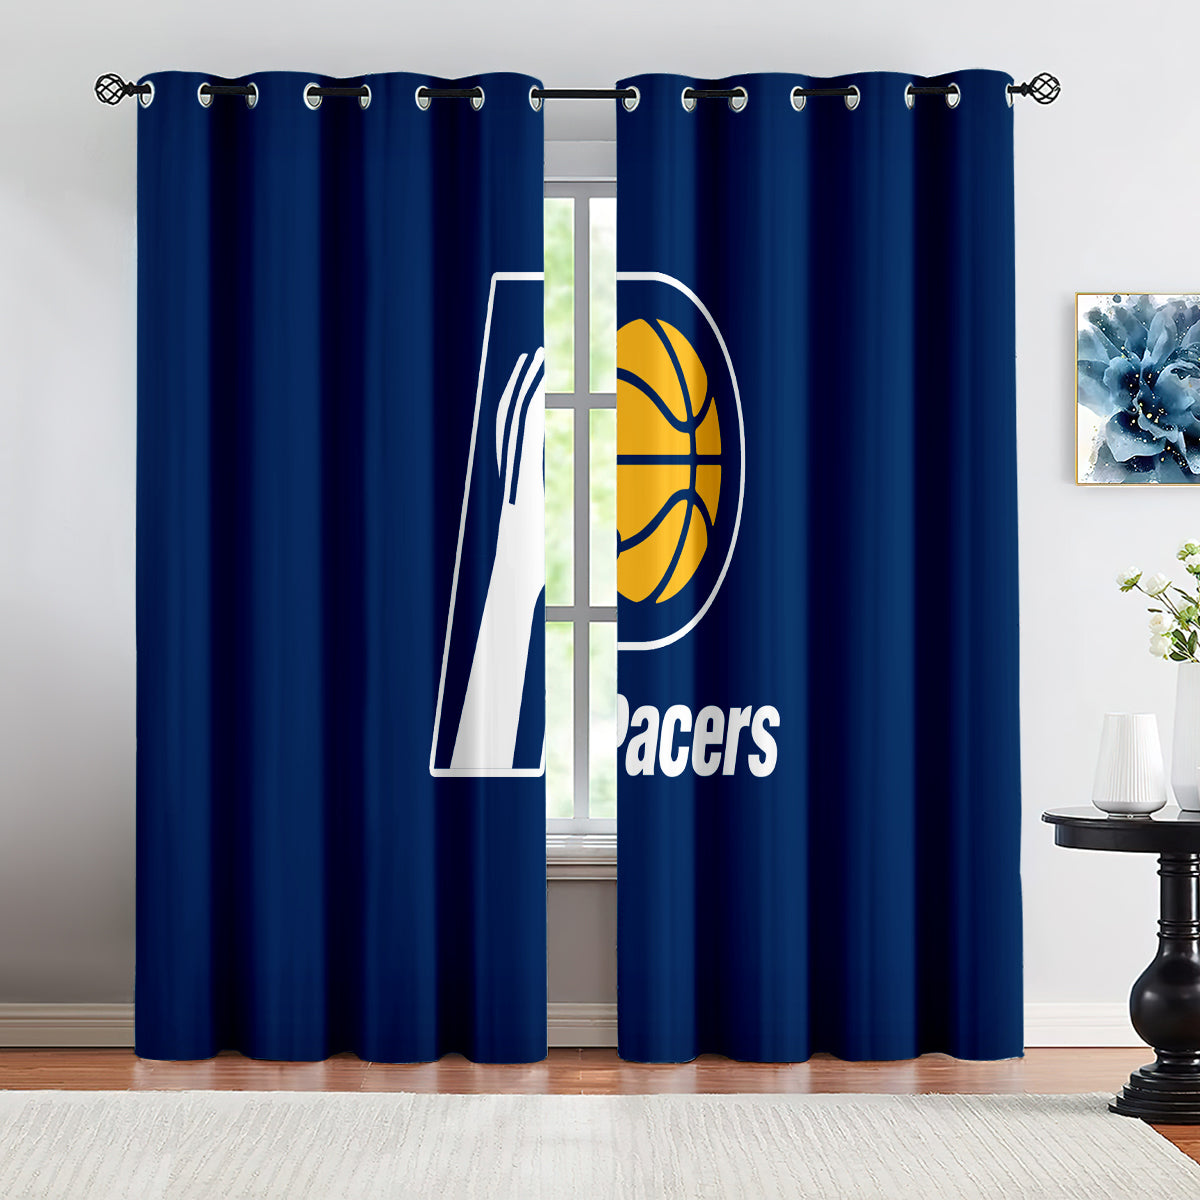 Indiana Basketball Pacers Blackout Curtains Drapes For Window Treatment Set